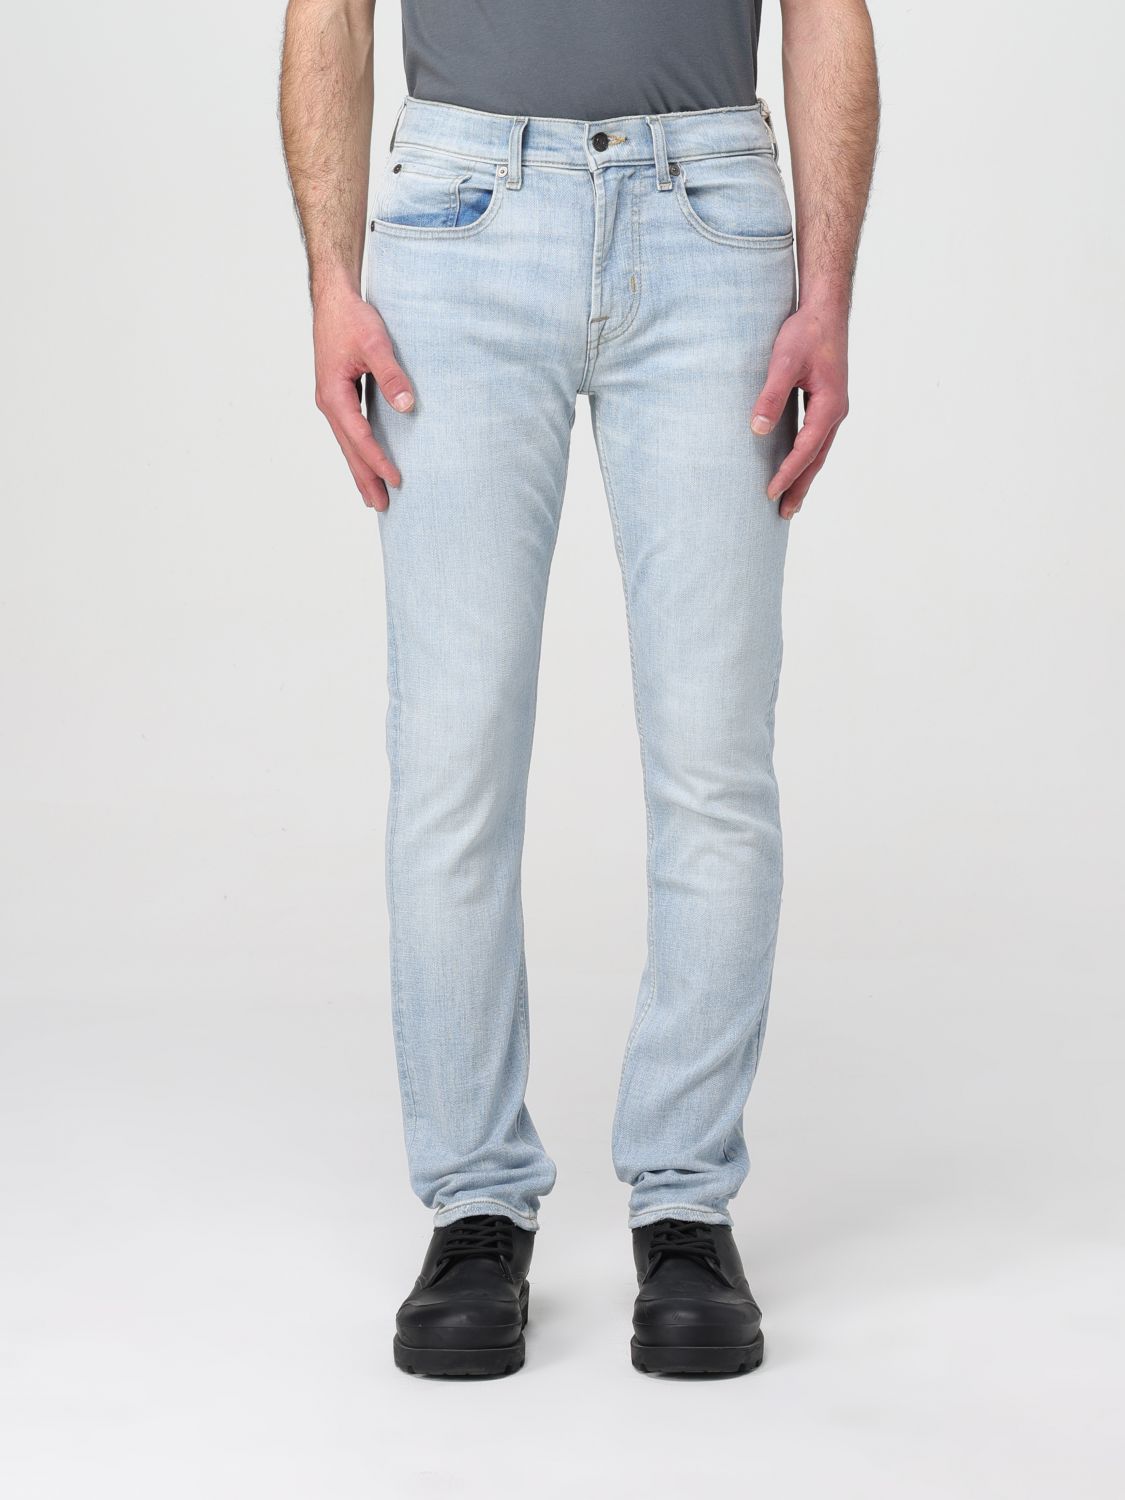 jeans 7 for all mankind men colour gnawed blue